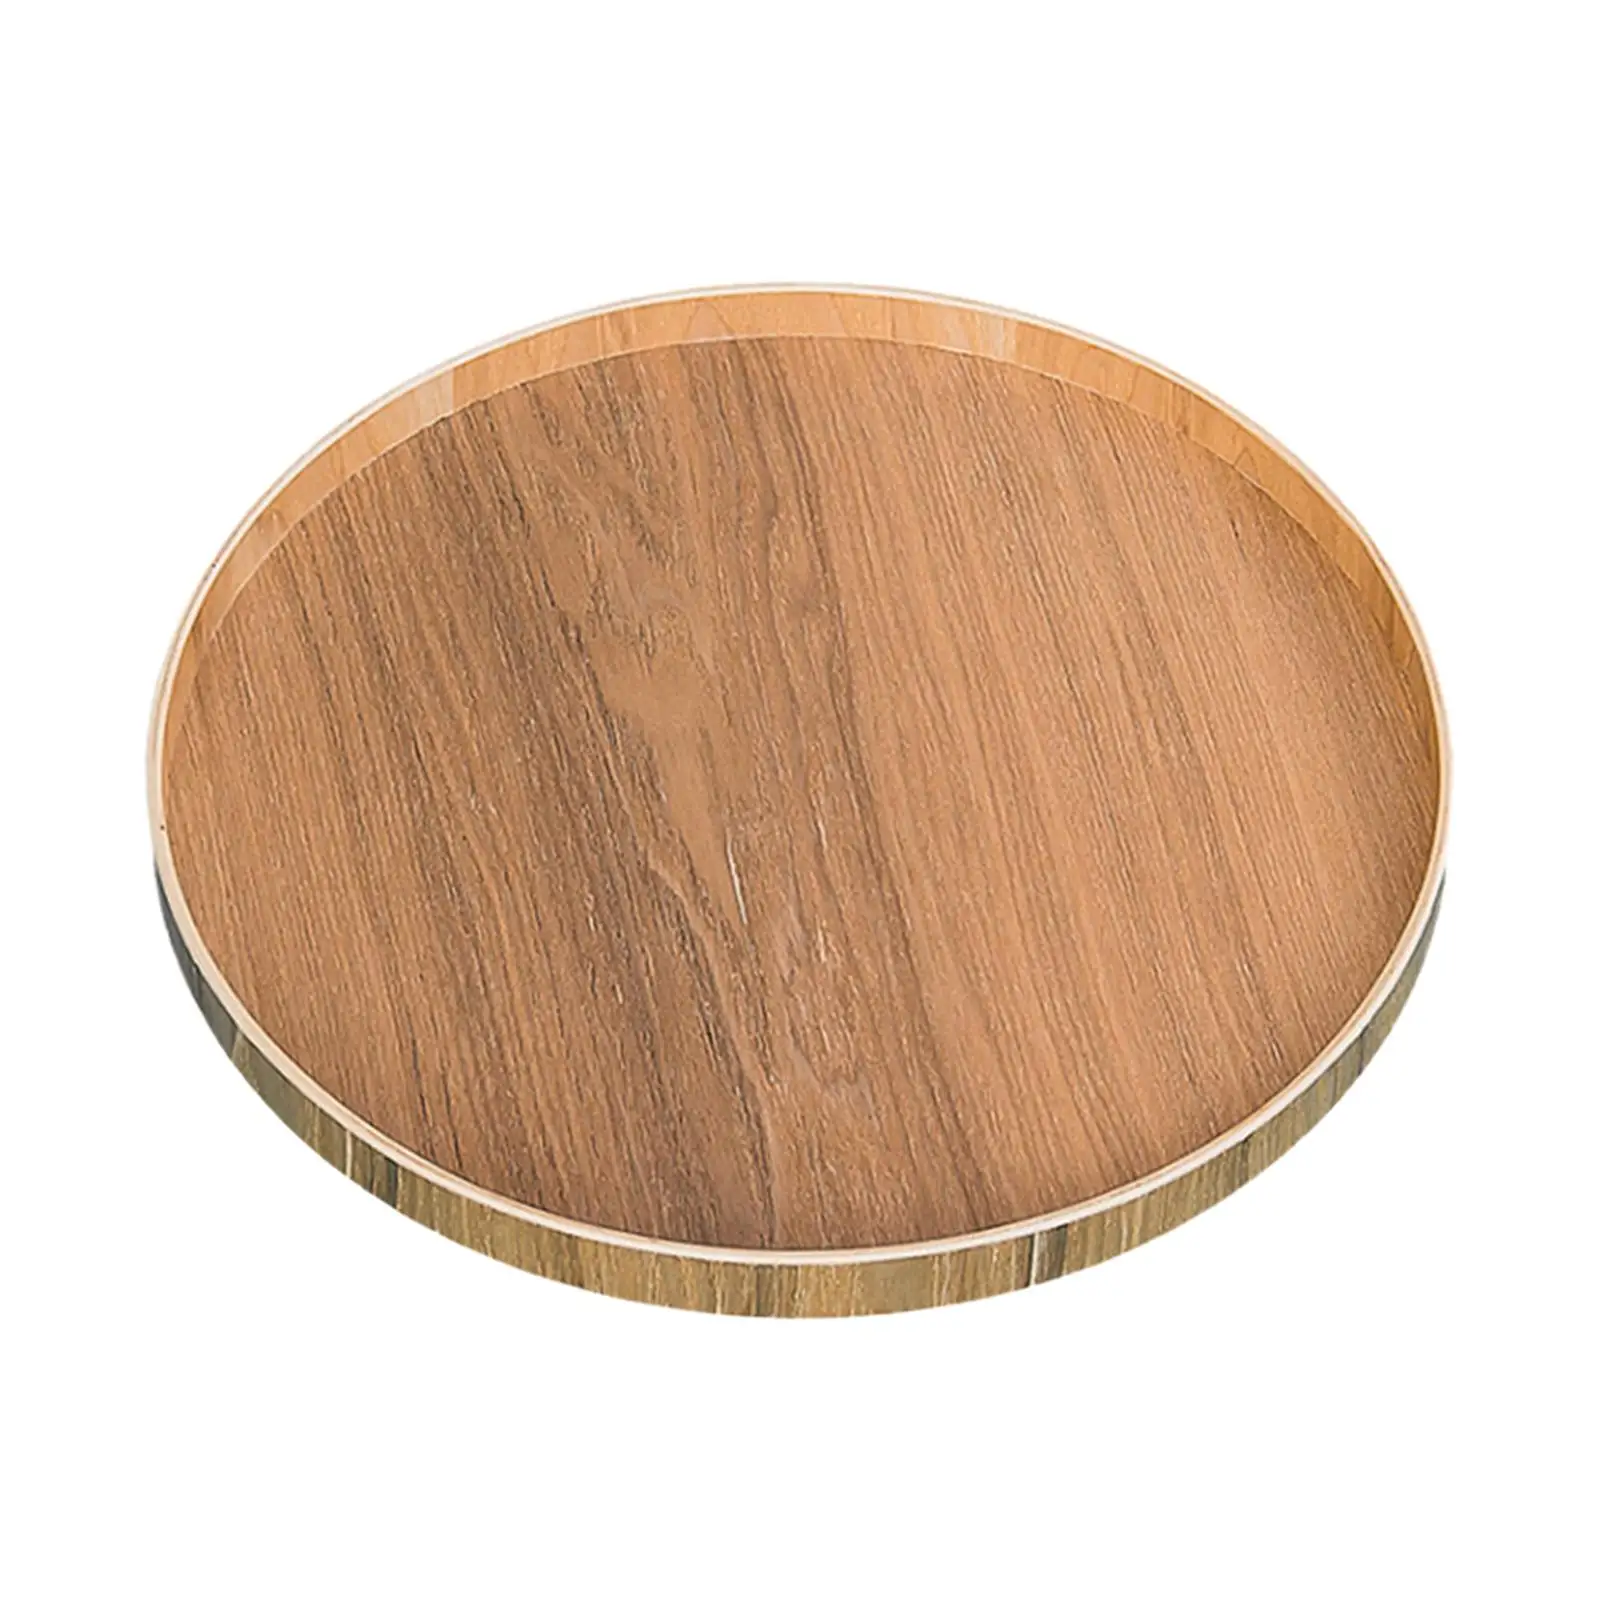 Wooden Serving Plate Dessert Tray Farmhouse Decorative Tray Fruit Plate for Home Pantry Bathroom Kitchen Countertop Dining Table